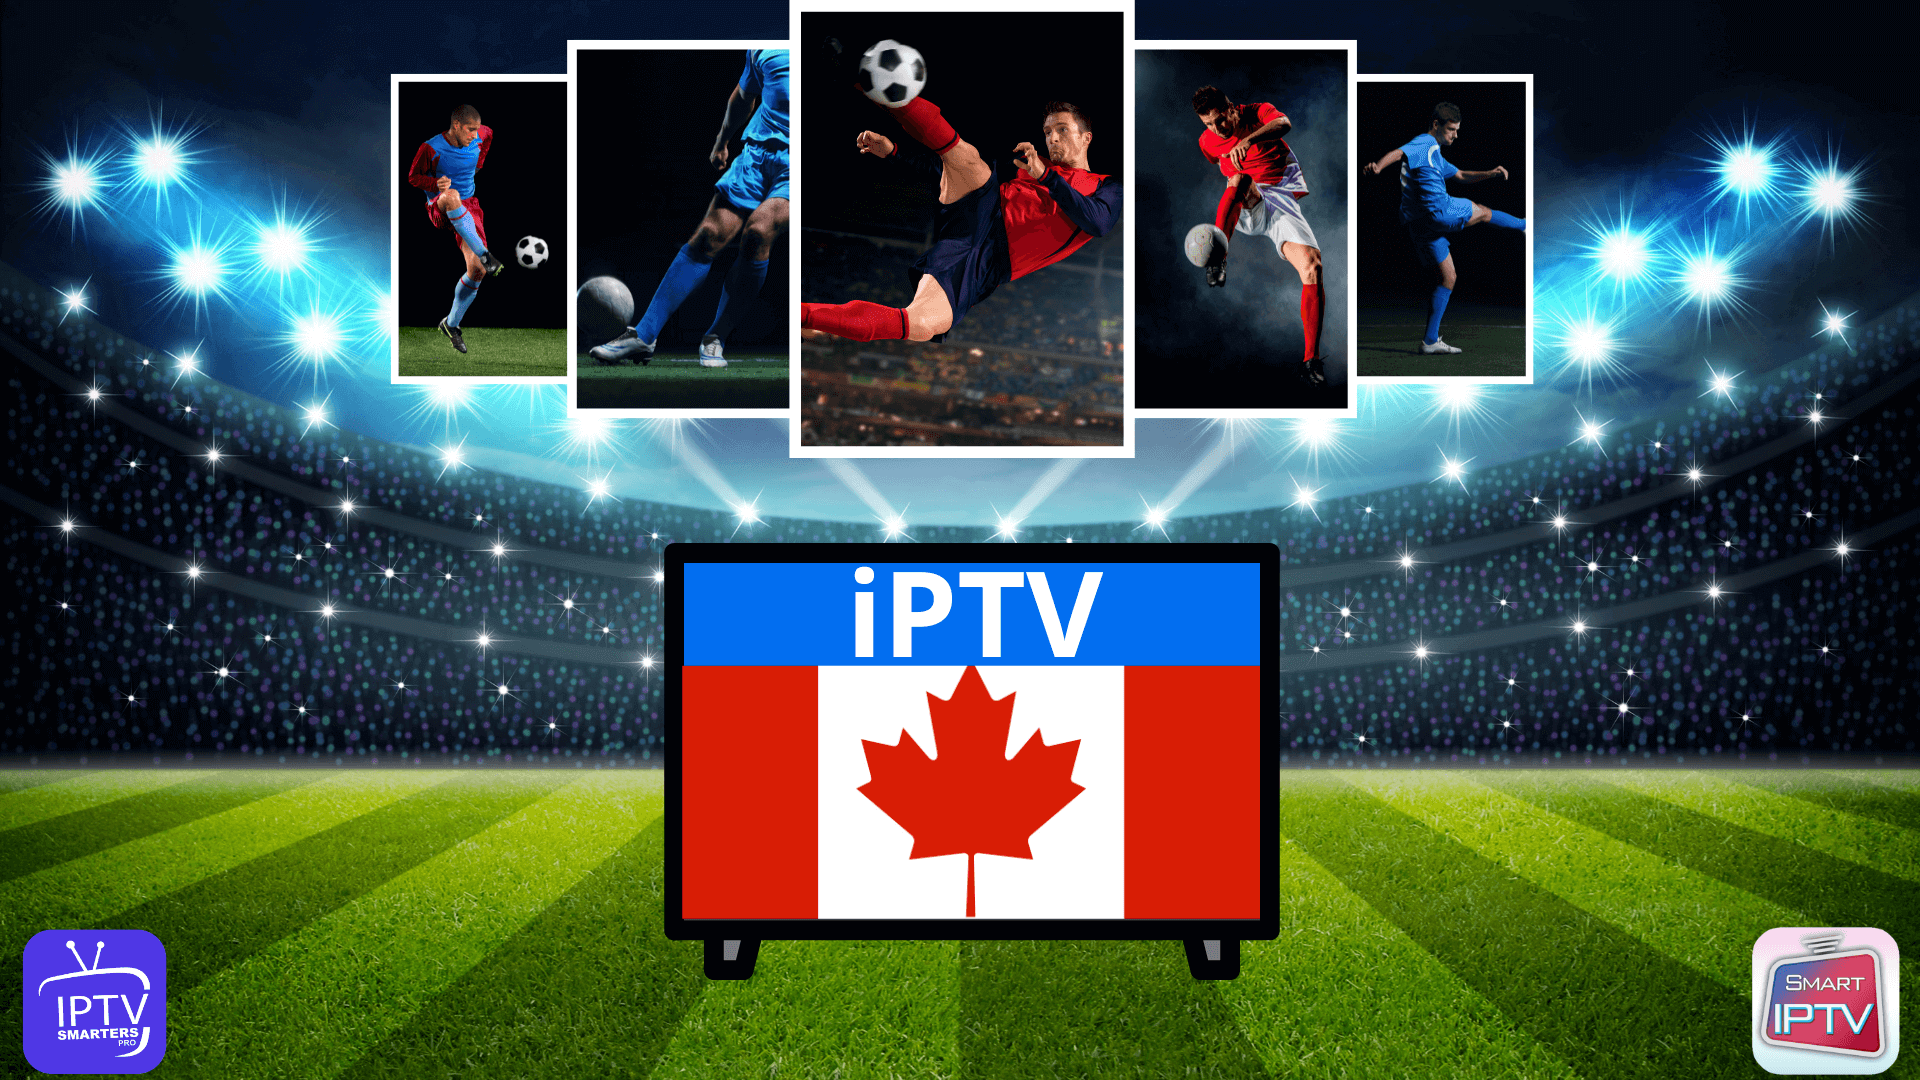 IPTV CAN*** [ IPTV SERVICES ] IPTV CAN*** IPTV CAN*** IPTV 12 Month - IPTV CAN*** IPTV 12 Month - IPTV CAN*** IPTV 12 Month - IPTV CAN***